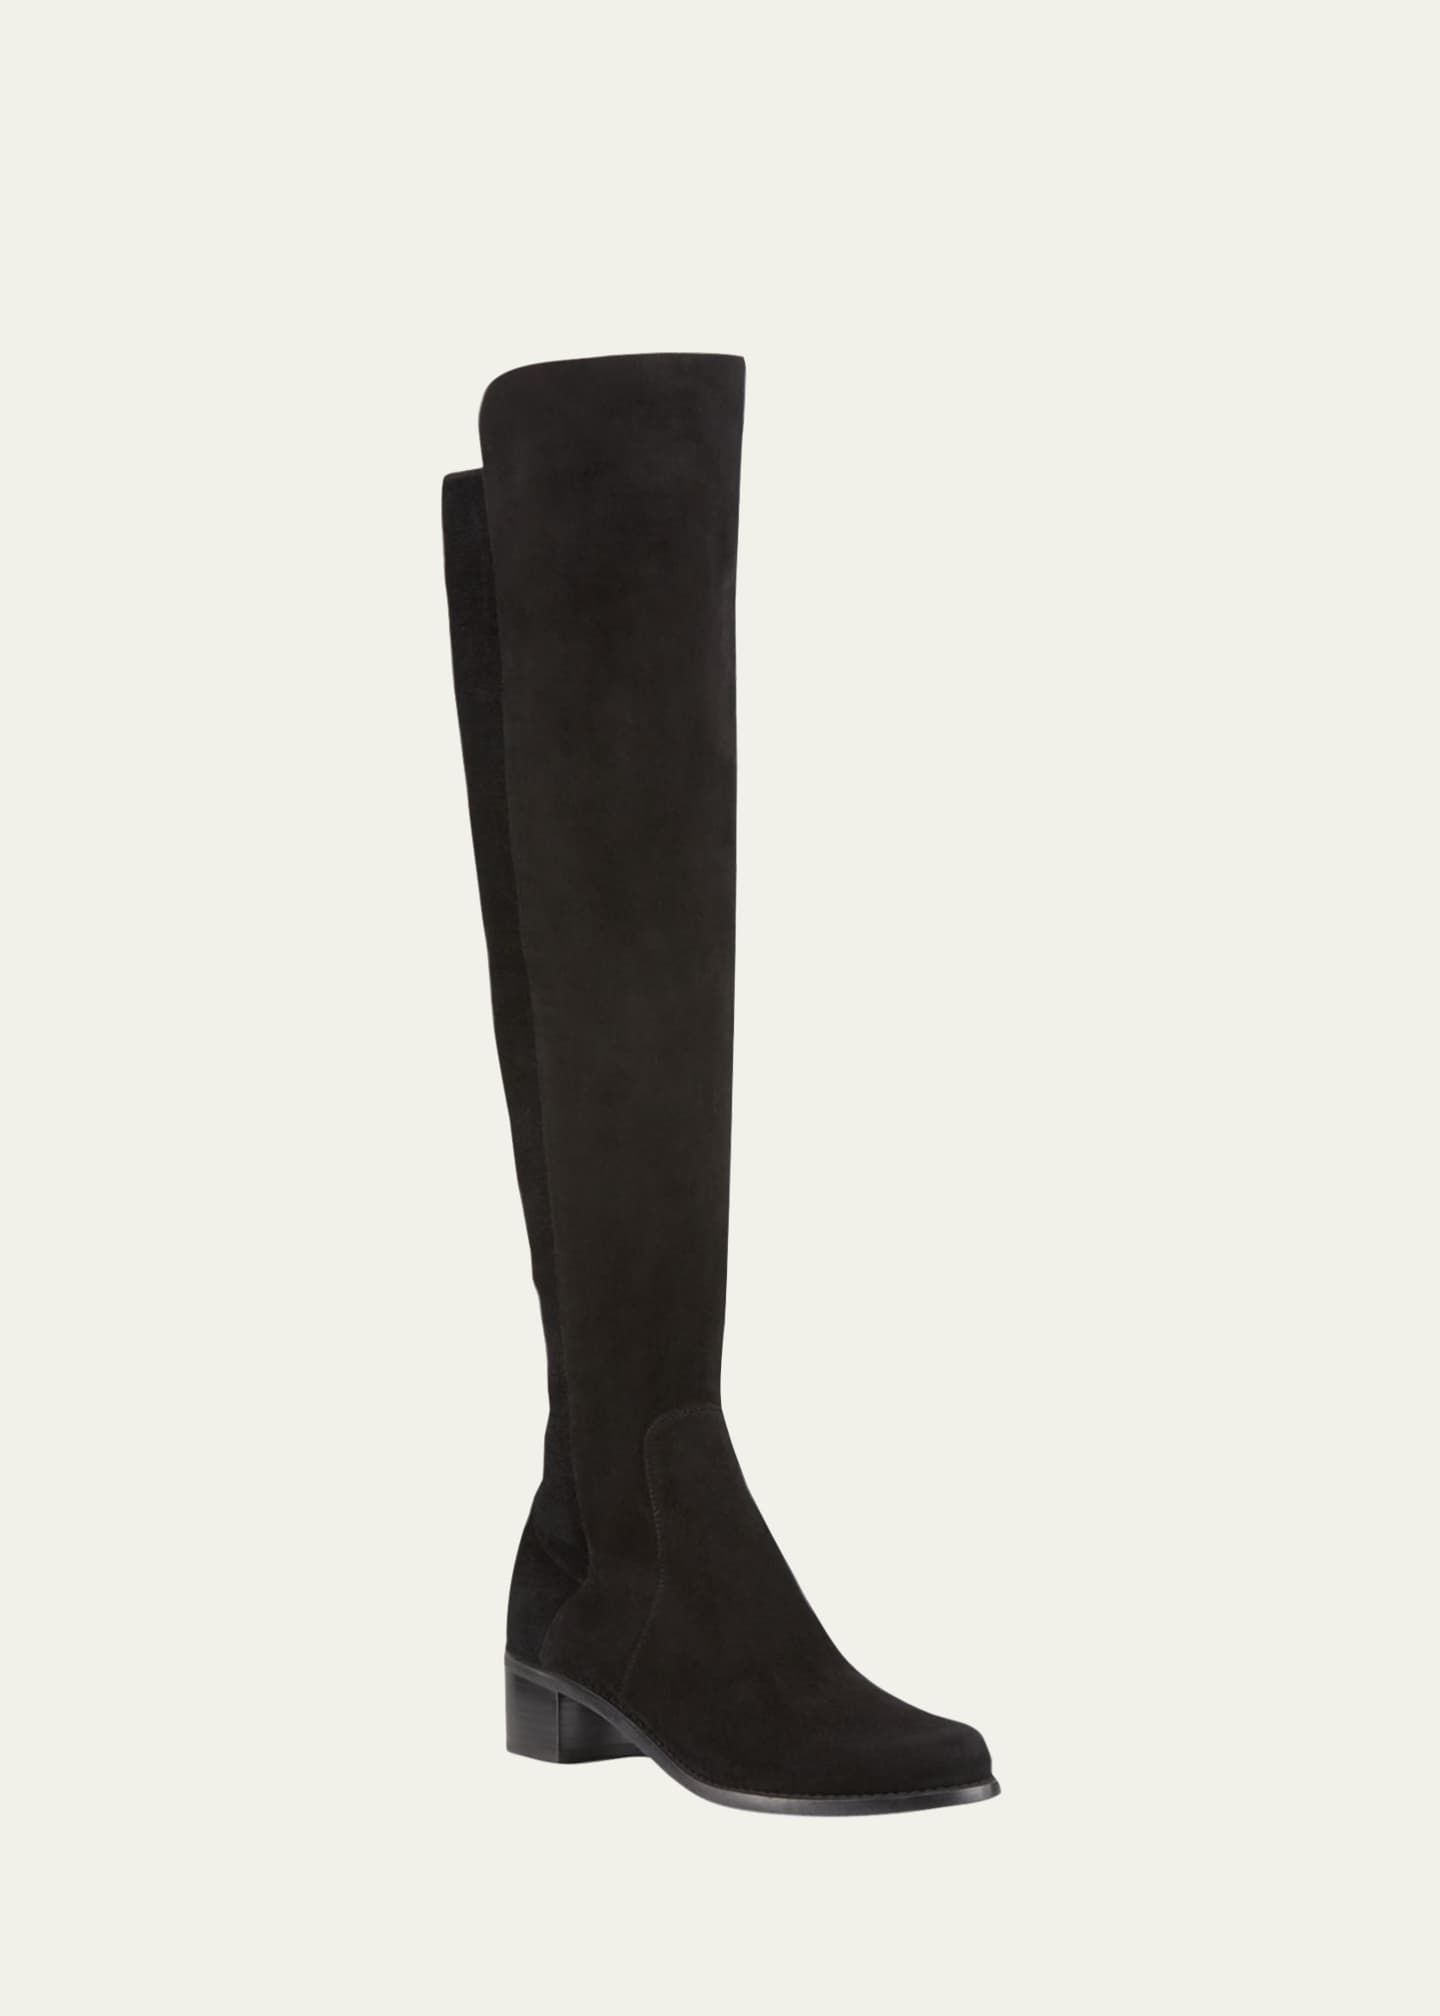 Stuart Weitzman Reserve Stretch-Suede Knee Boots Image 2 of 3